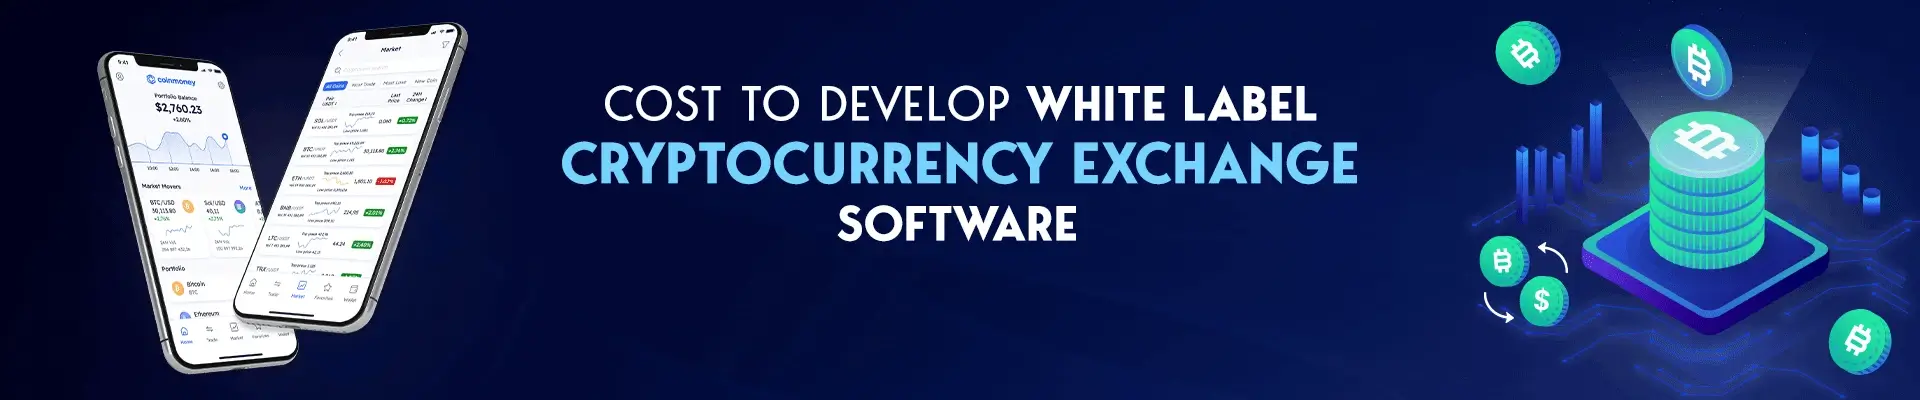 Cost to Develop White Label Cryptocurrency Exchange Software